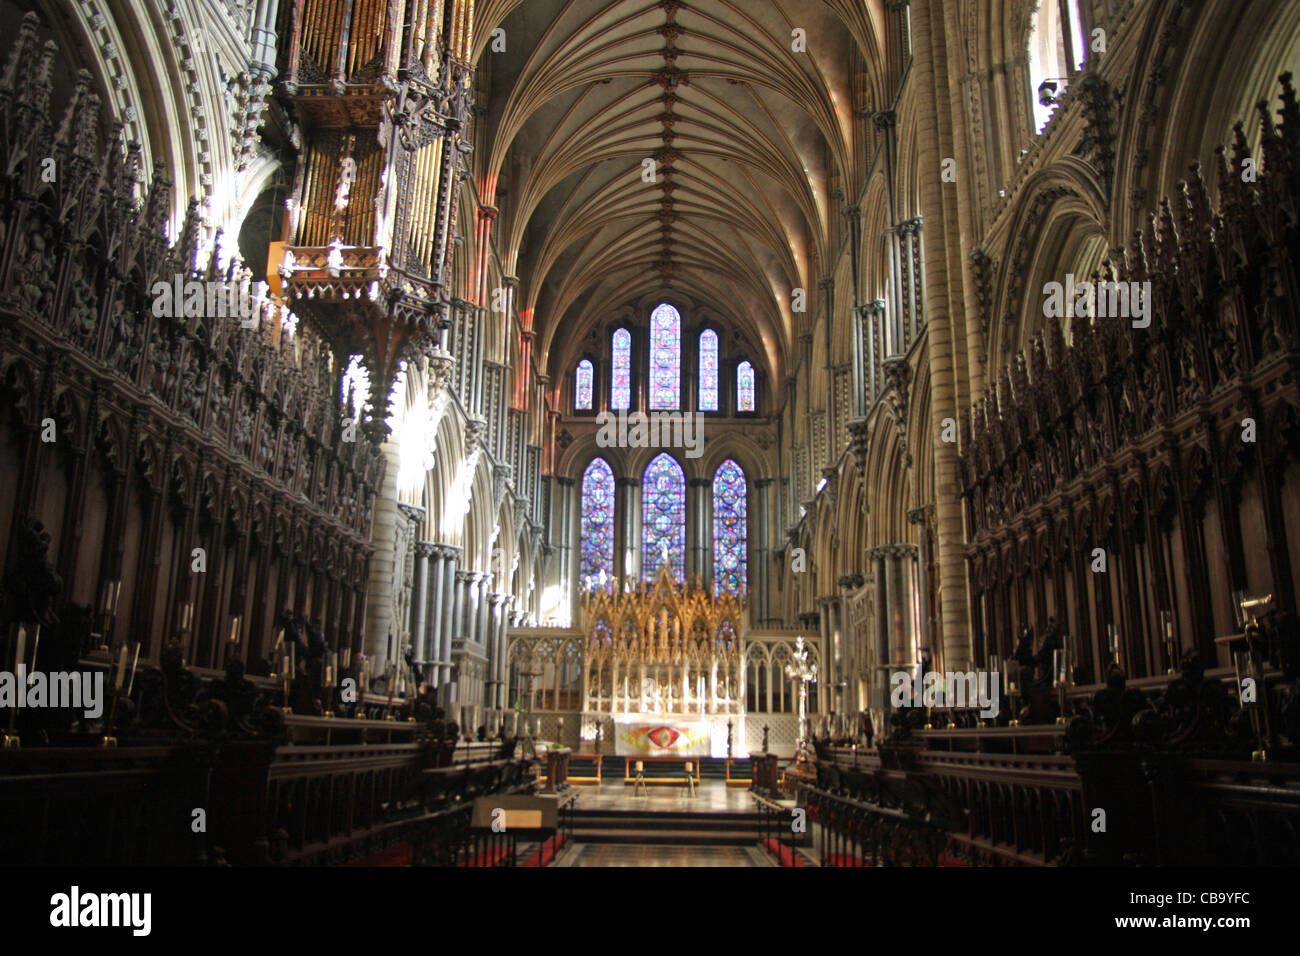 Interior of Ely Cathedral in Cambridgeshire, England Stock Photo